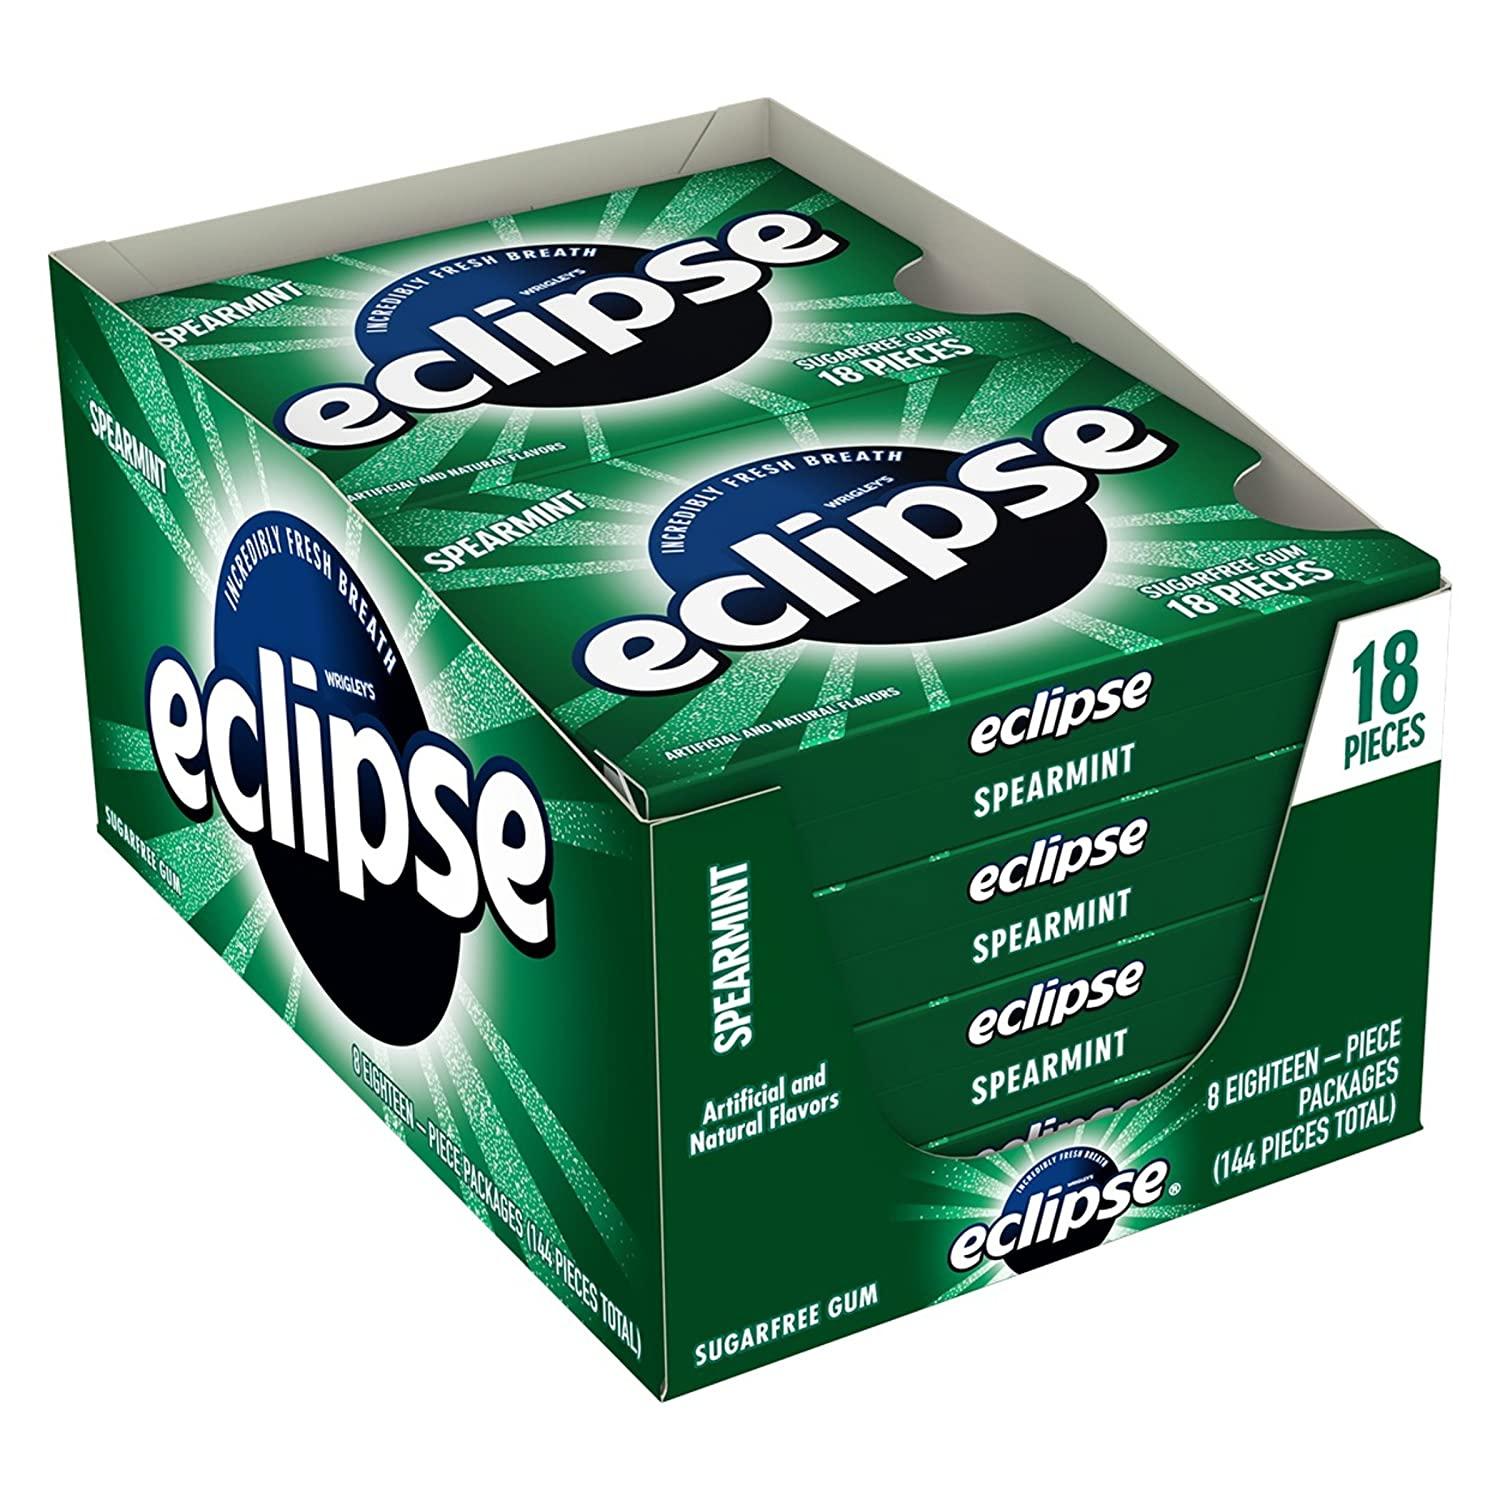 8 Eclipse Sugar Free Gum for $5.95 Shipped